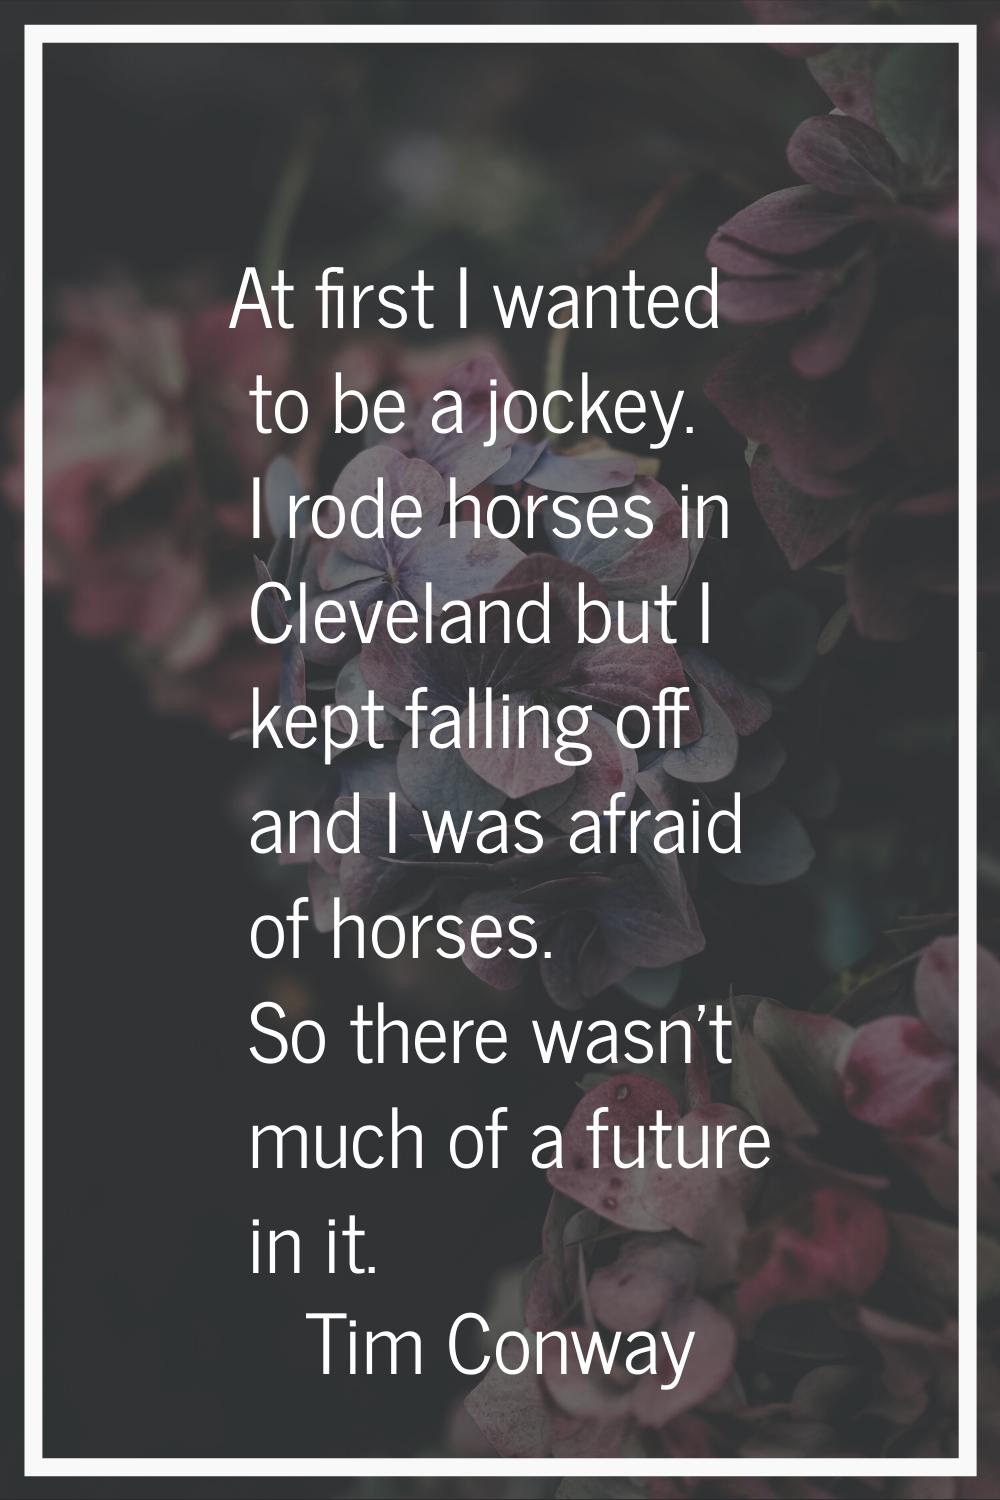 At first I wanted to be a jockey. I rode horses in Cleveland but I kept falling off and I was afrai